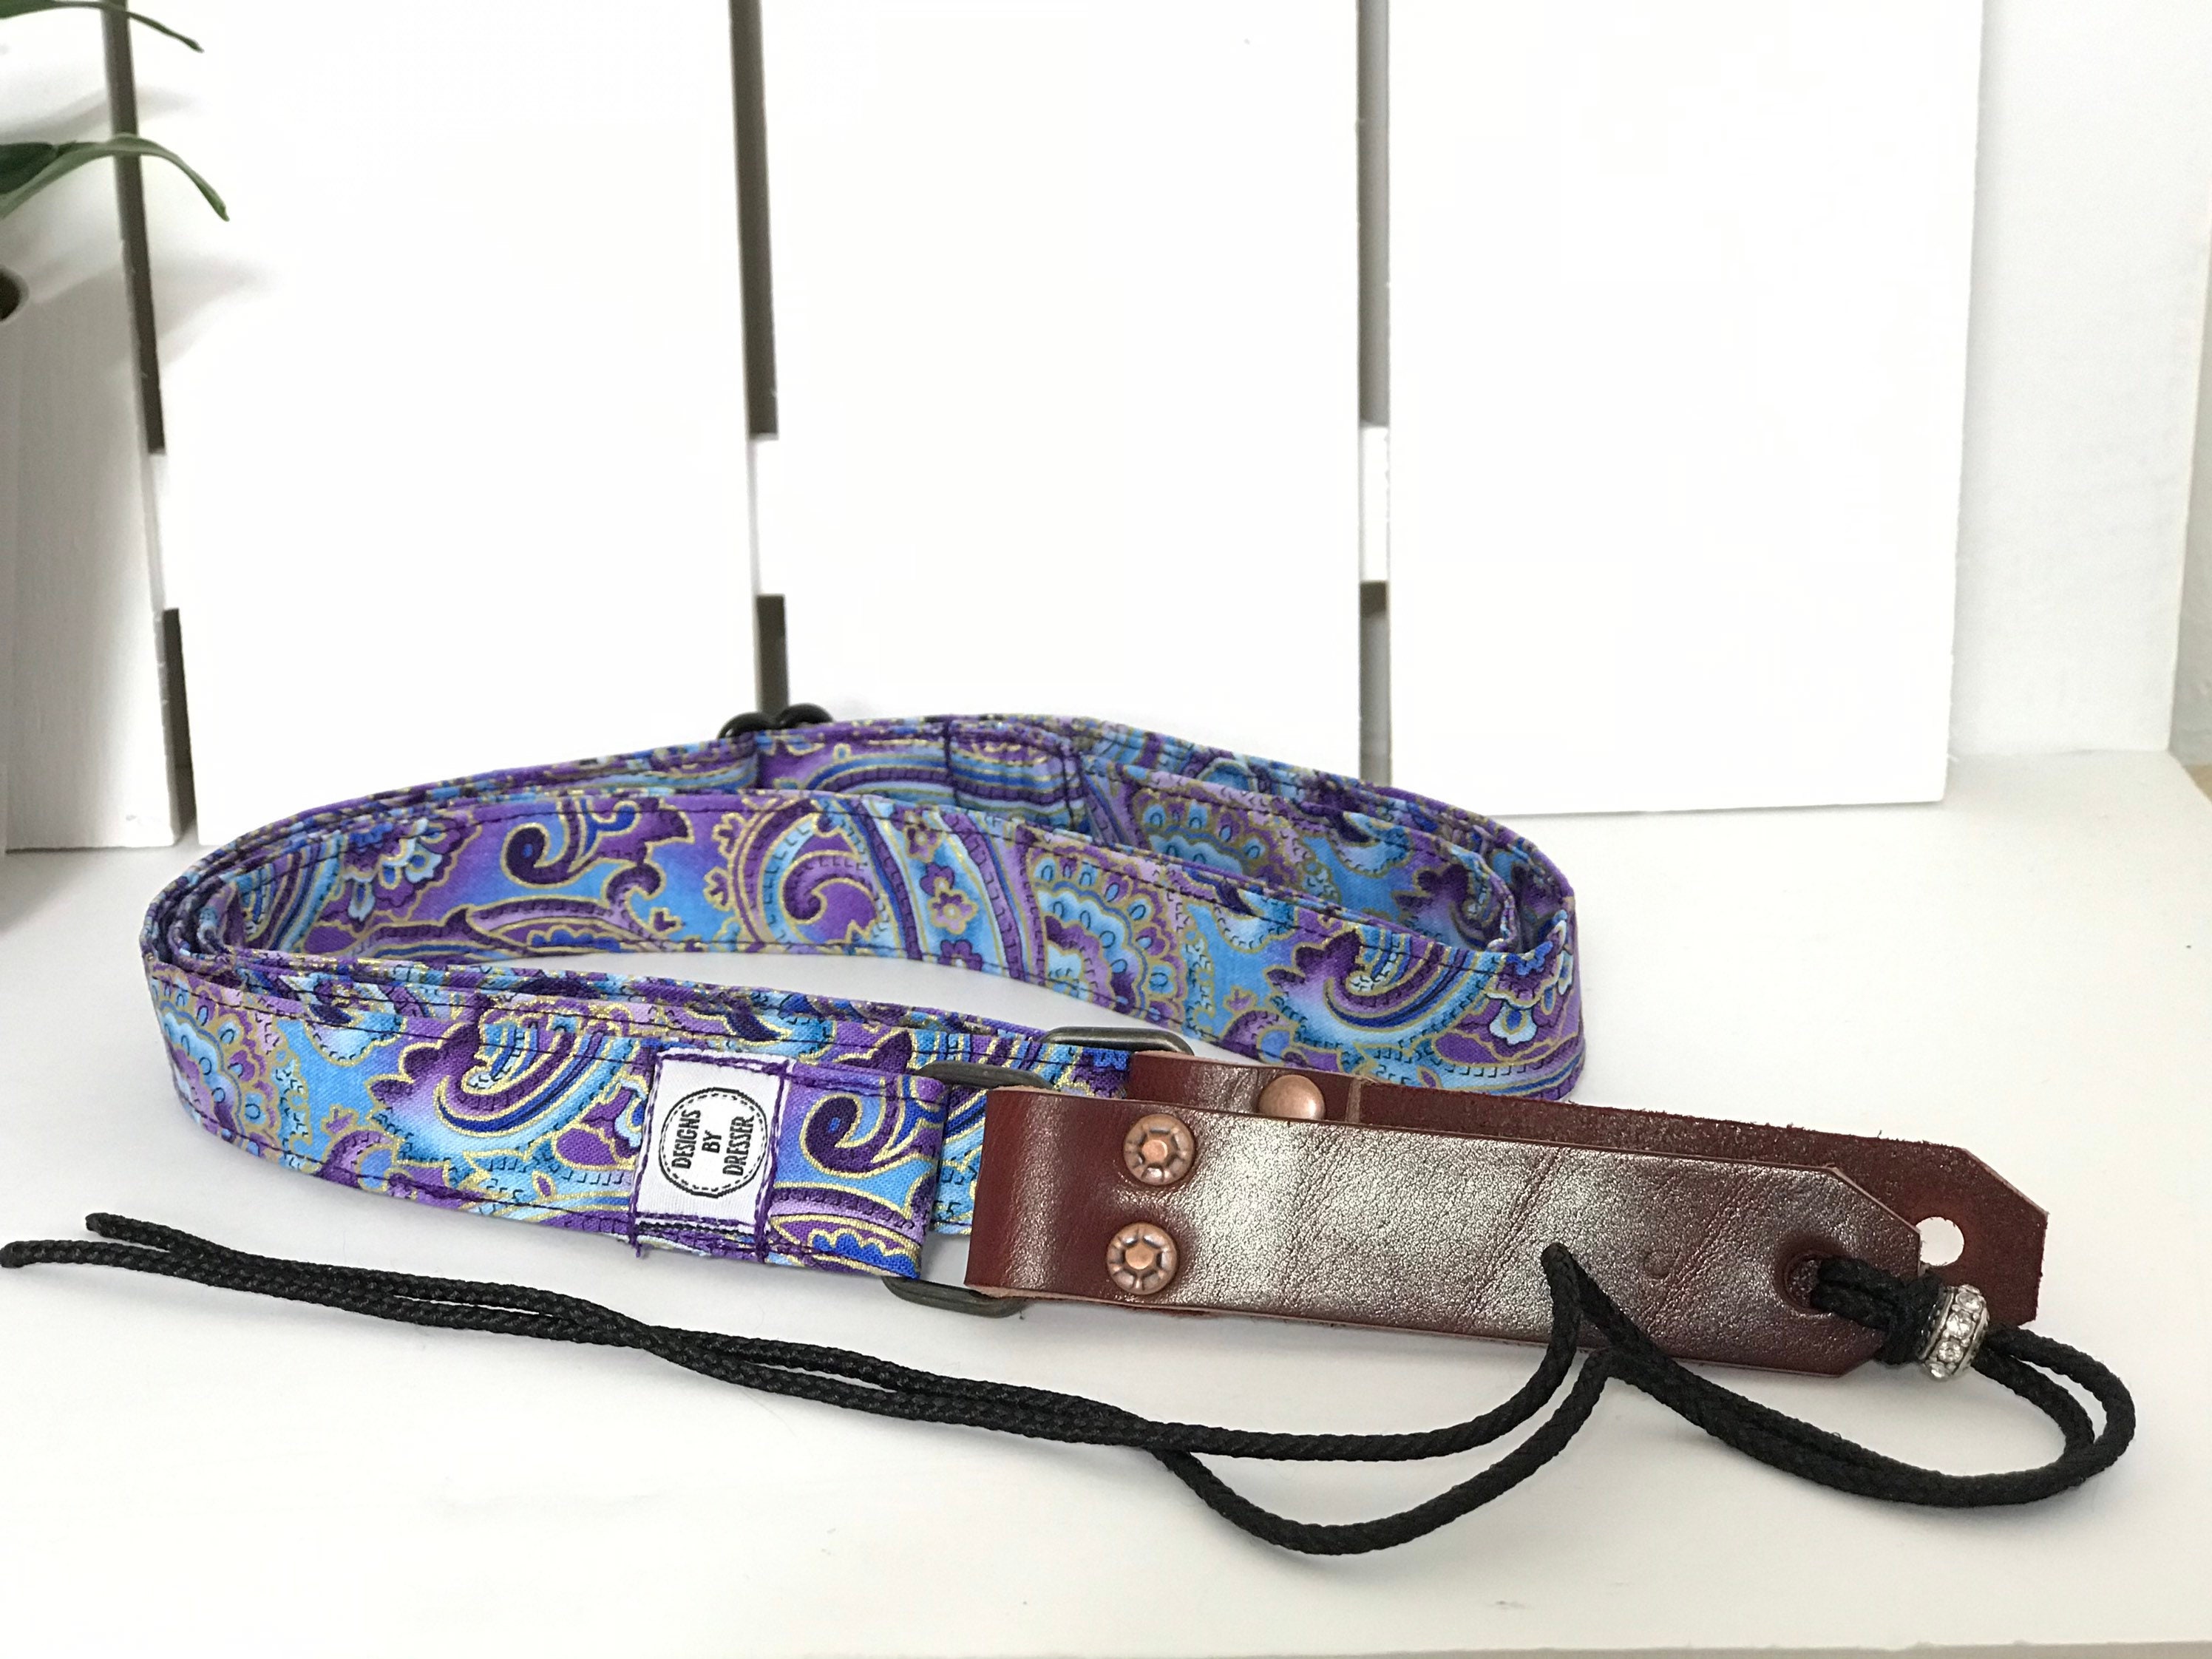 Lakota Flat Braided Mandolin Strap With Strap Button Ends - Available -  Banjo Ben's General Store